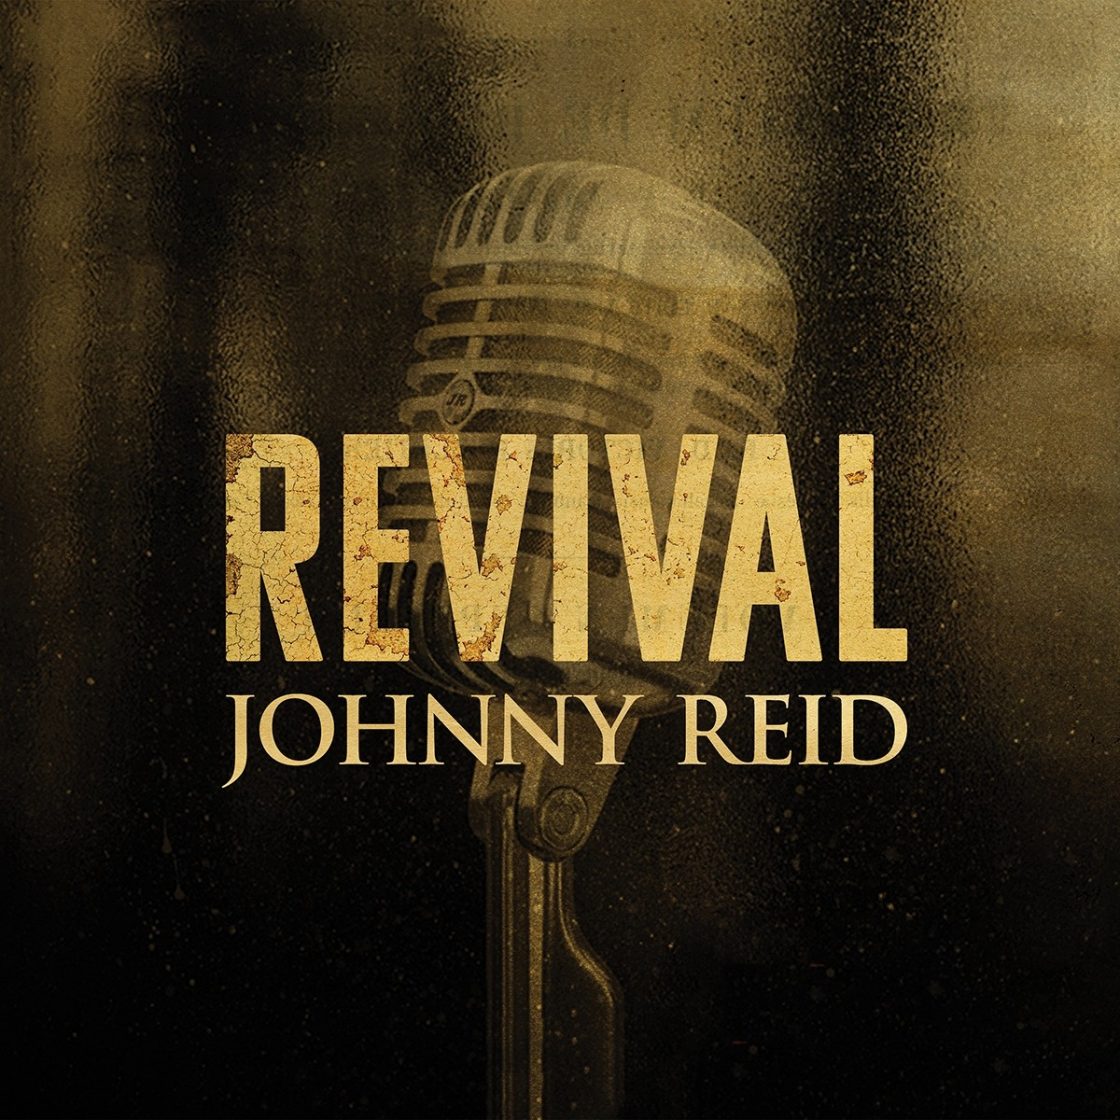 Johnny Reid’s Revival Tour Was A Smash In Charlottetown!